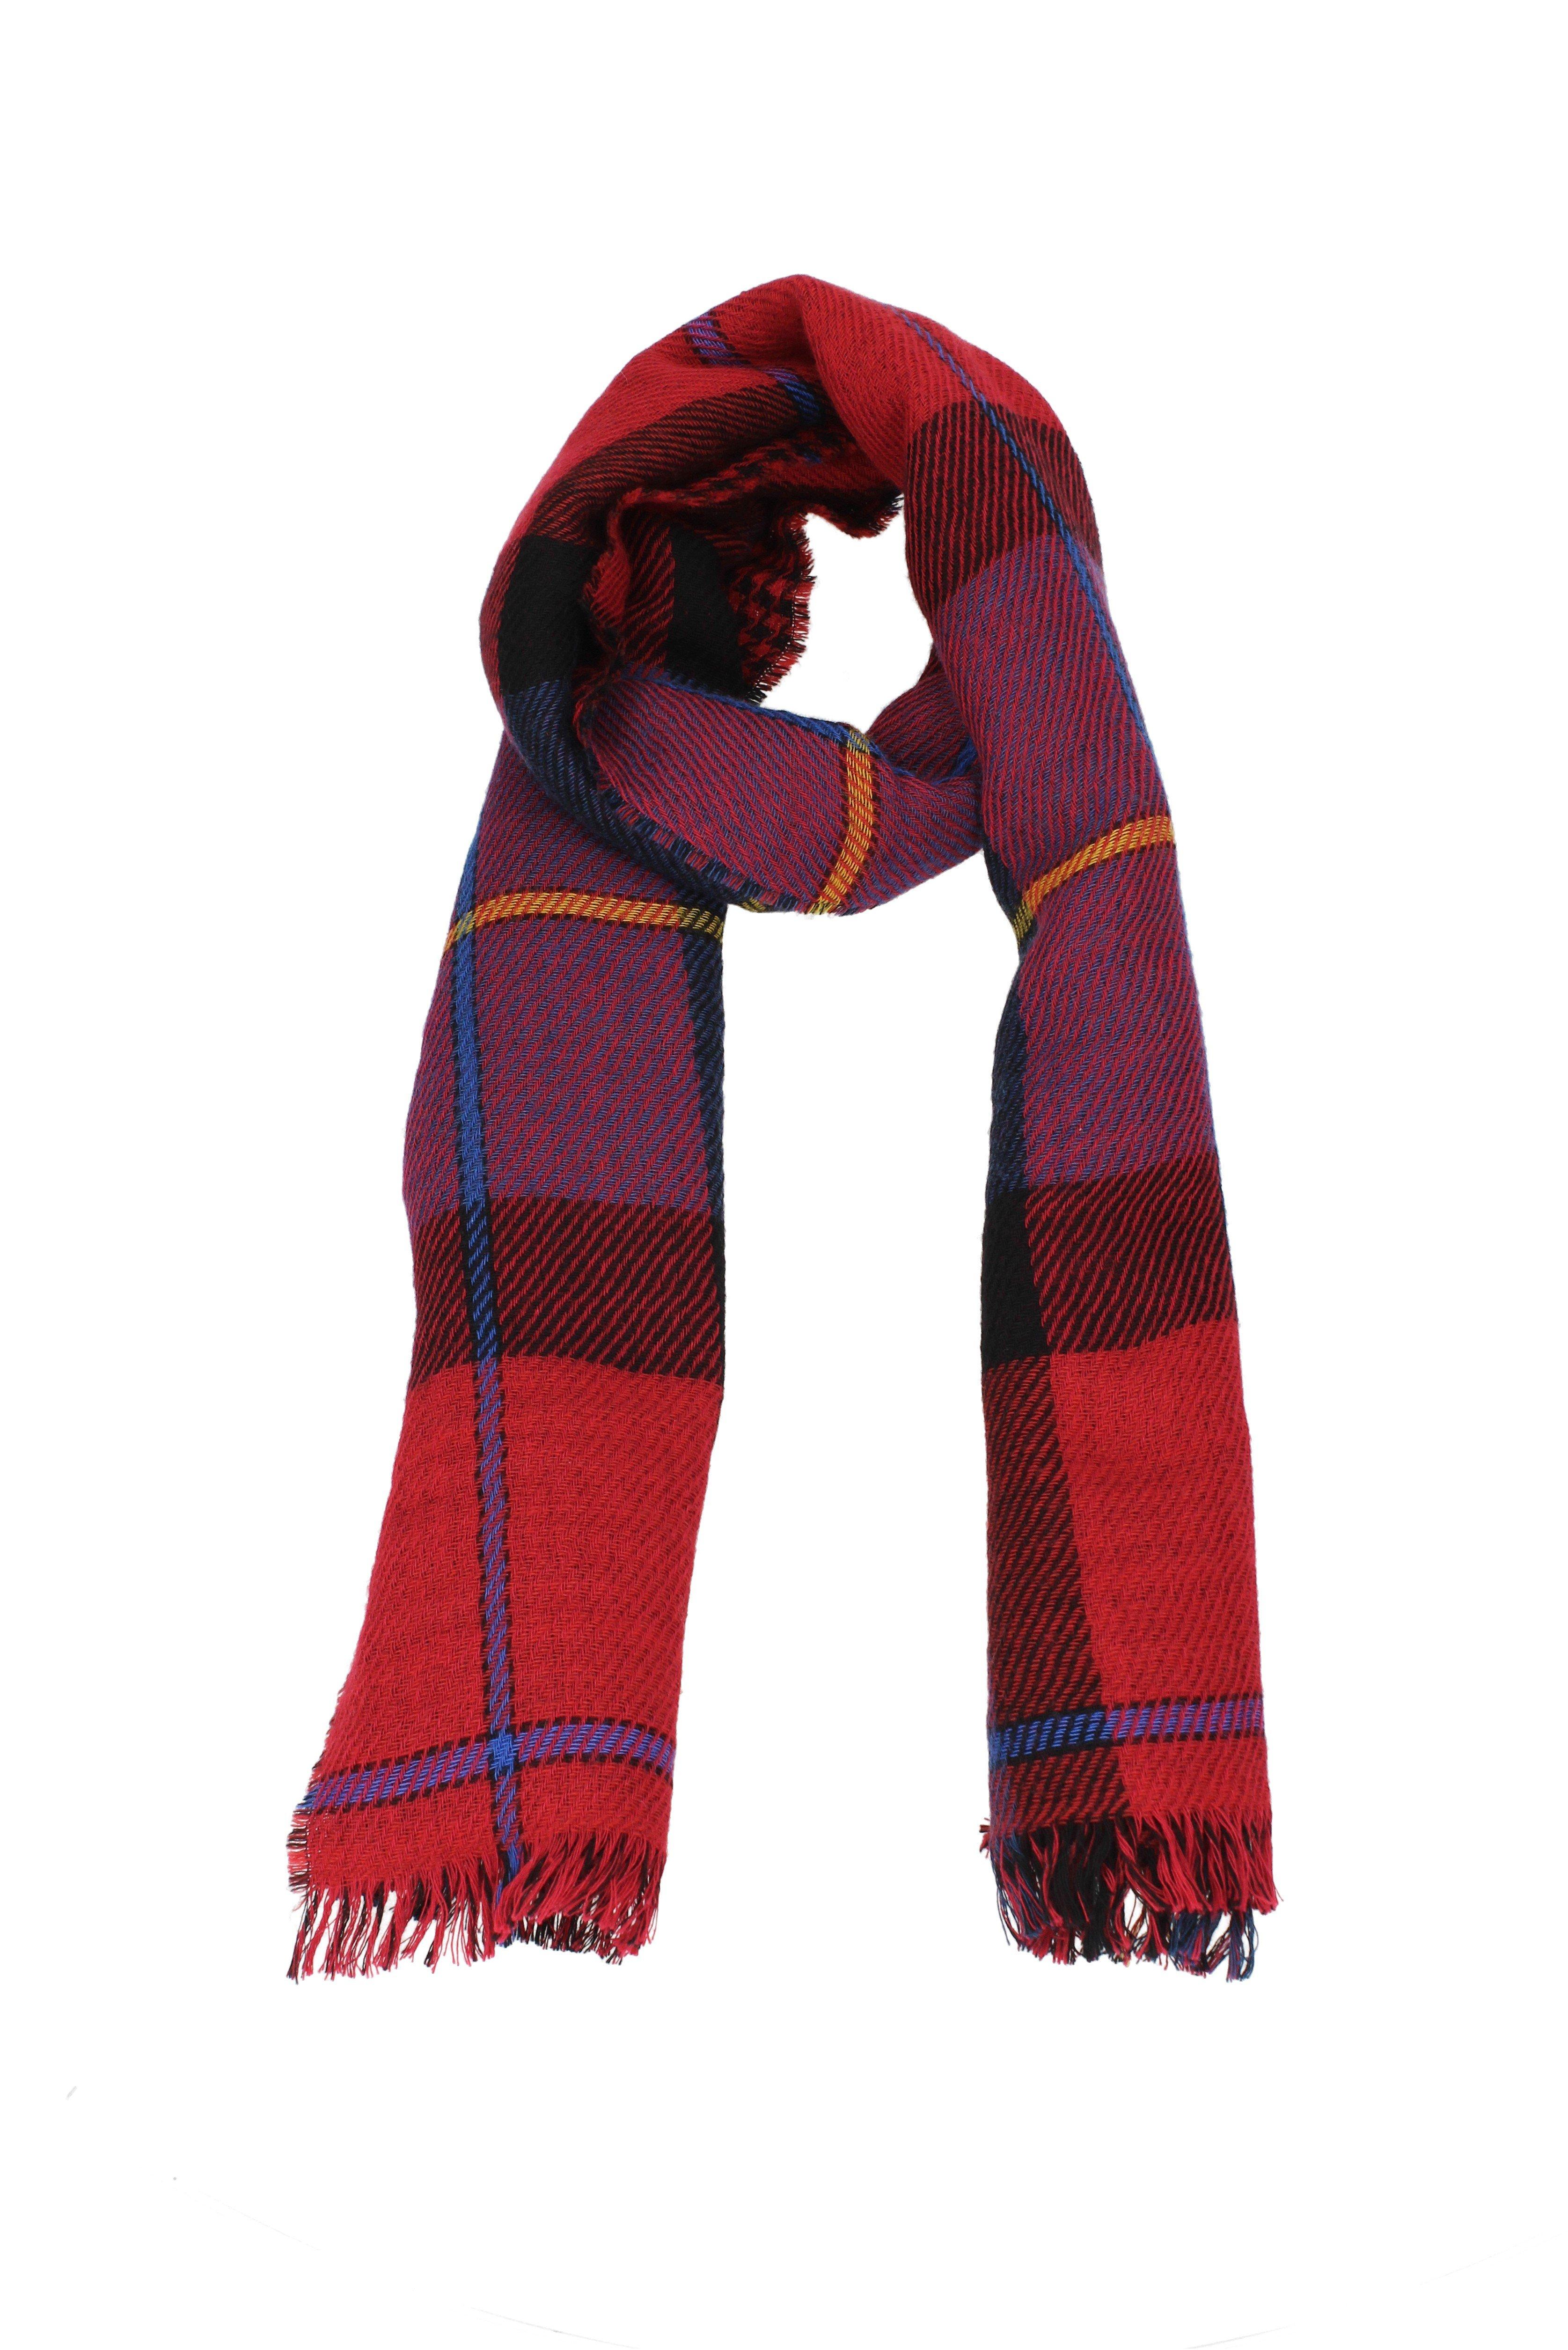 Altea Cotton Scarves in Red for Men - Lyst